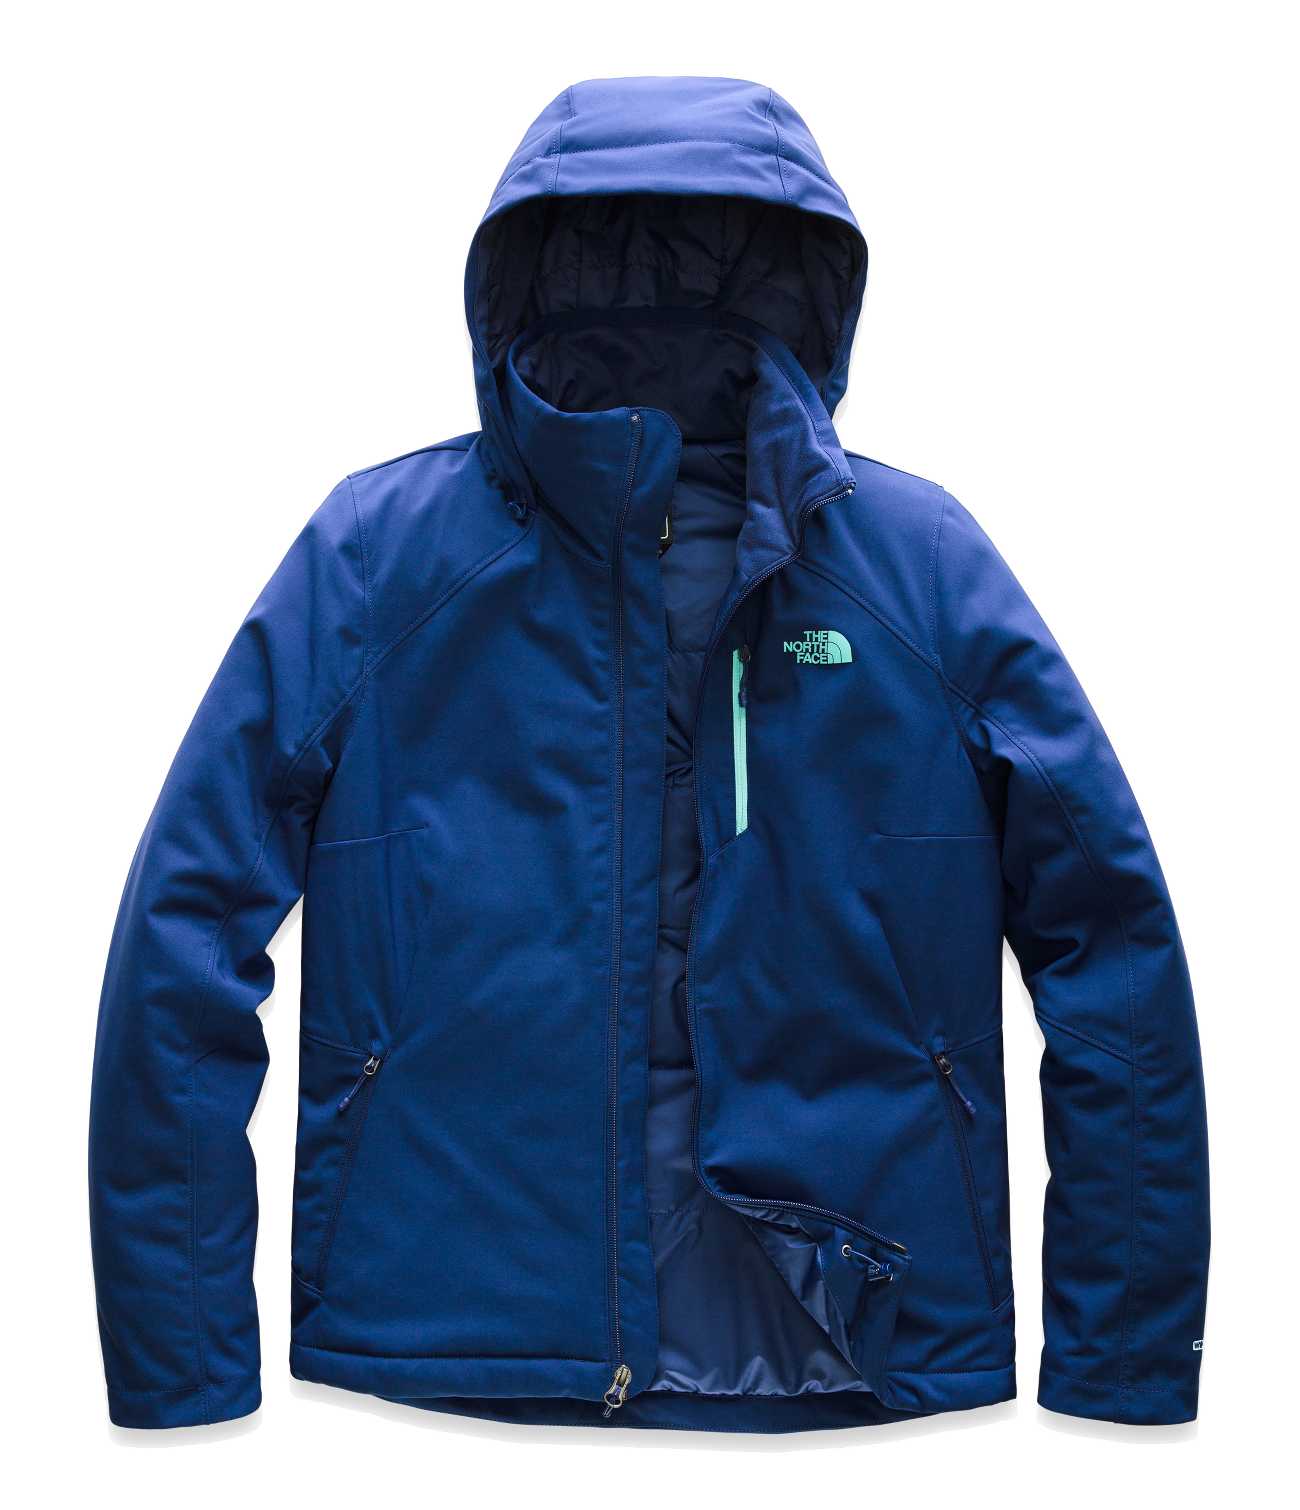 https://images.thenorthface.com/is/image/TheNorthFace/NF0A3ESQ_ZDE_hero?wid=1300&hei=1510&fmt=jpeg&qlt=50&resMode=sharp